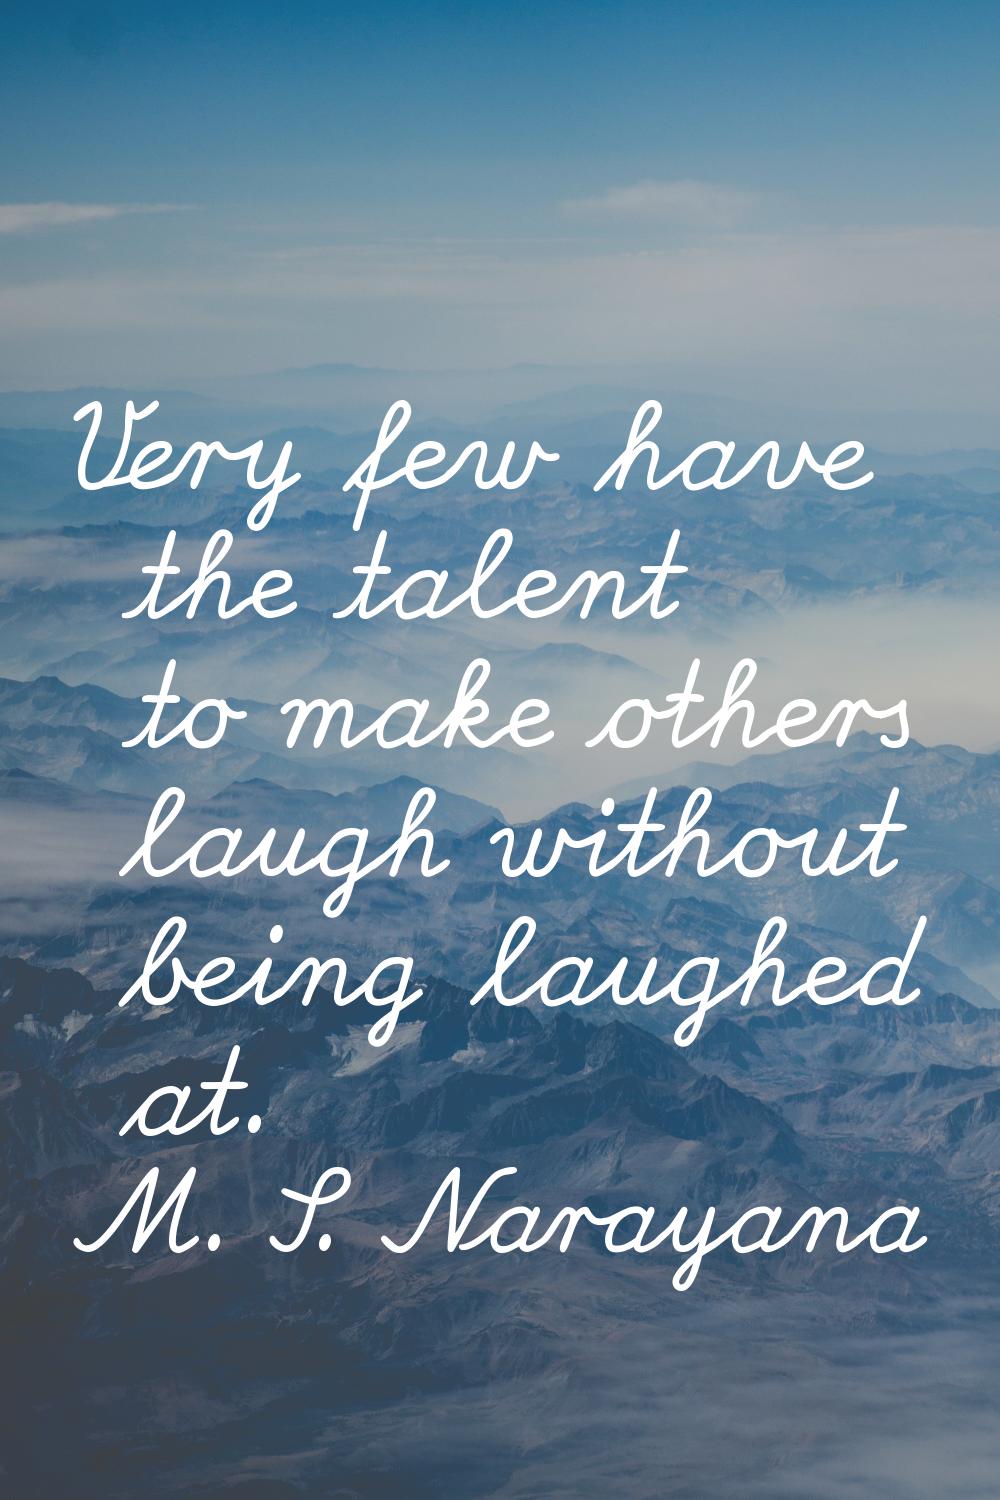 Very few have the talent to make others laugh without being laughed at.